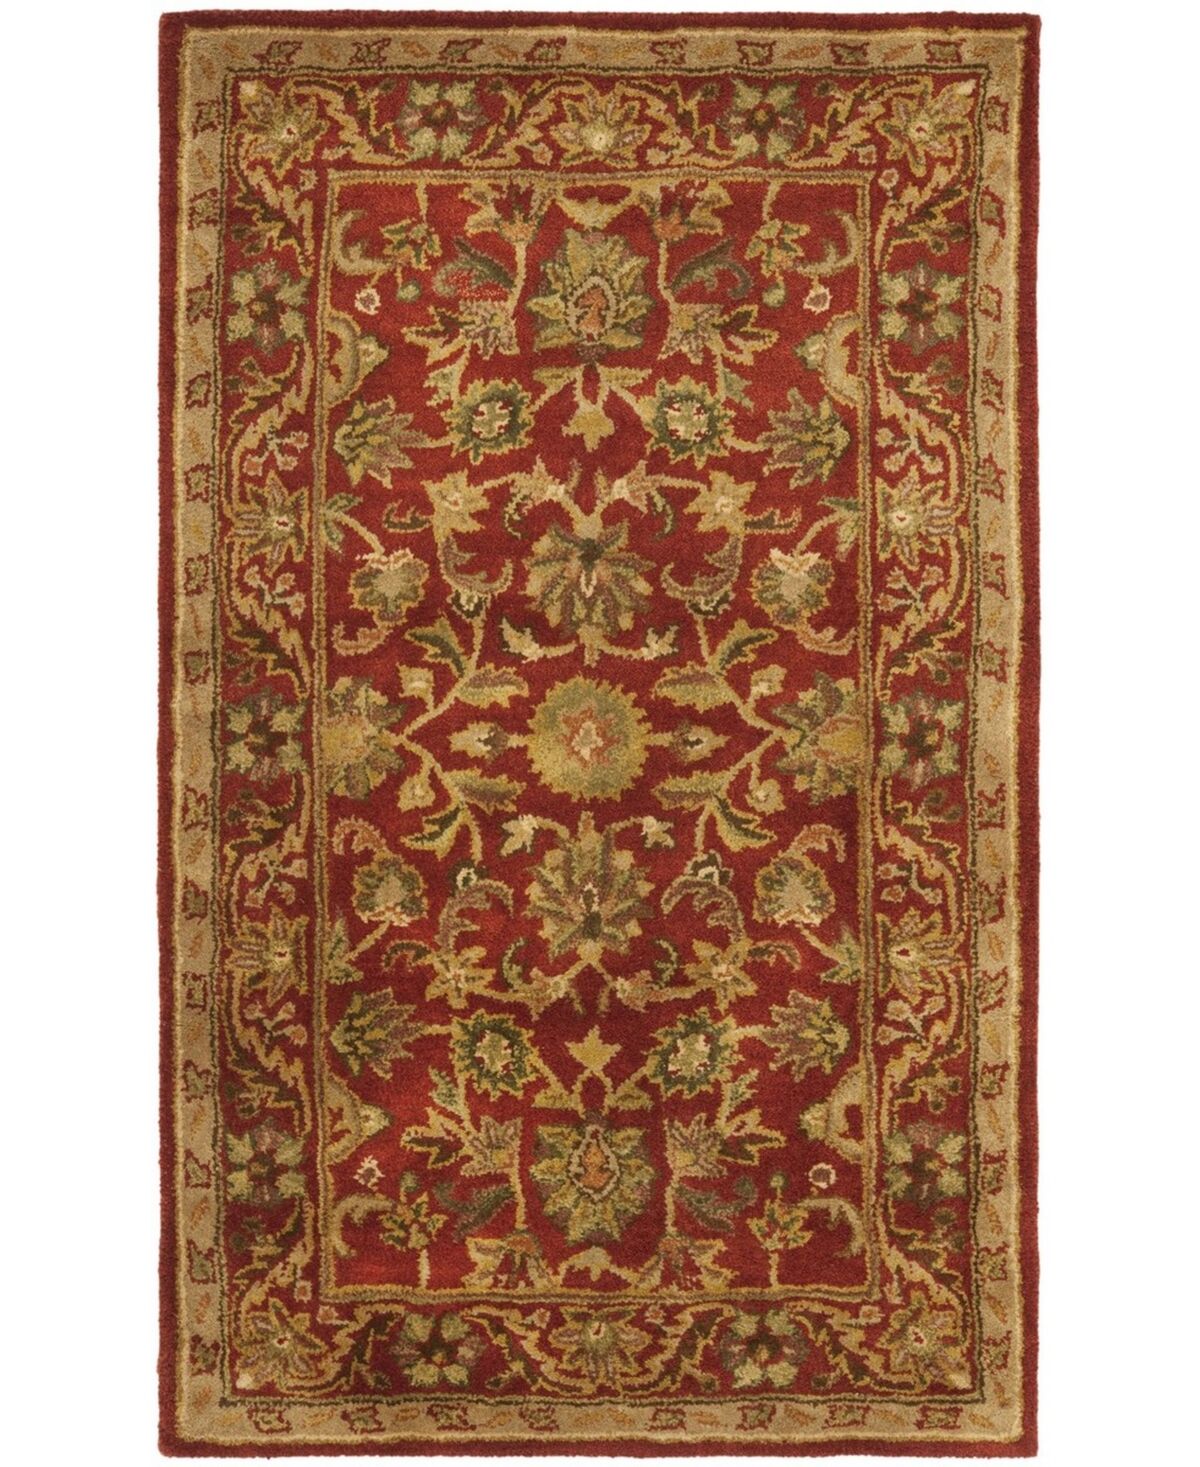 Safavieh Antiquity At52 Red 4' x 6' Area Rug - Red